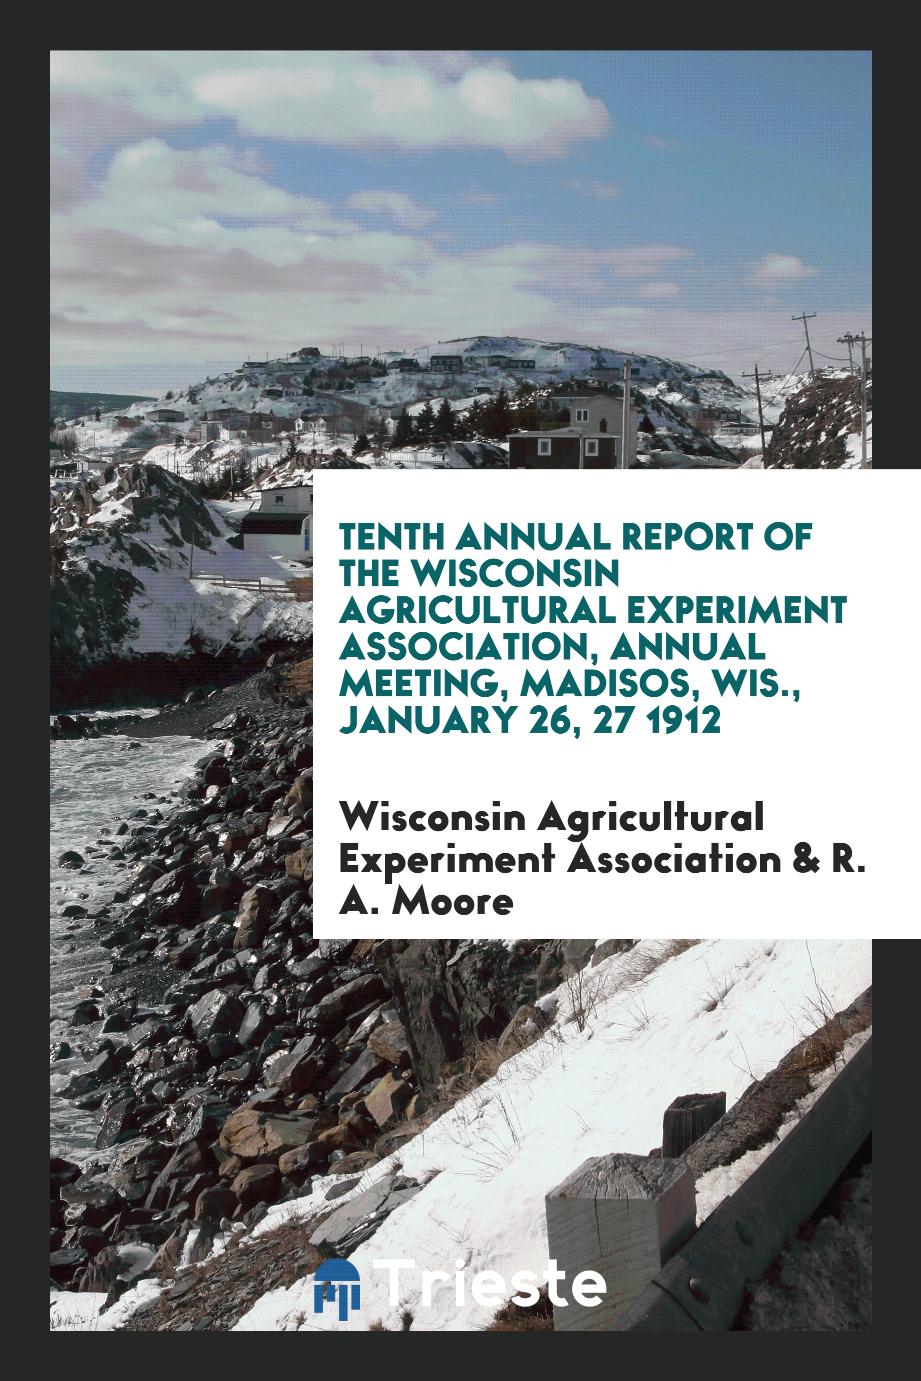 Tenth Annual Report of the Wisconsin Agricultural Experiment Association, Annual Meeting, Madisos, Wis., January 26, 27 1912